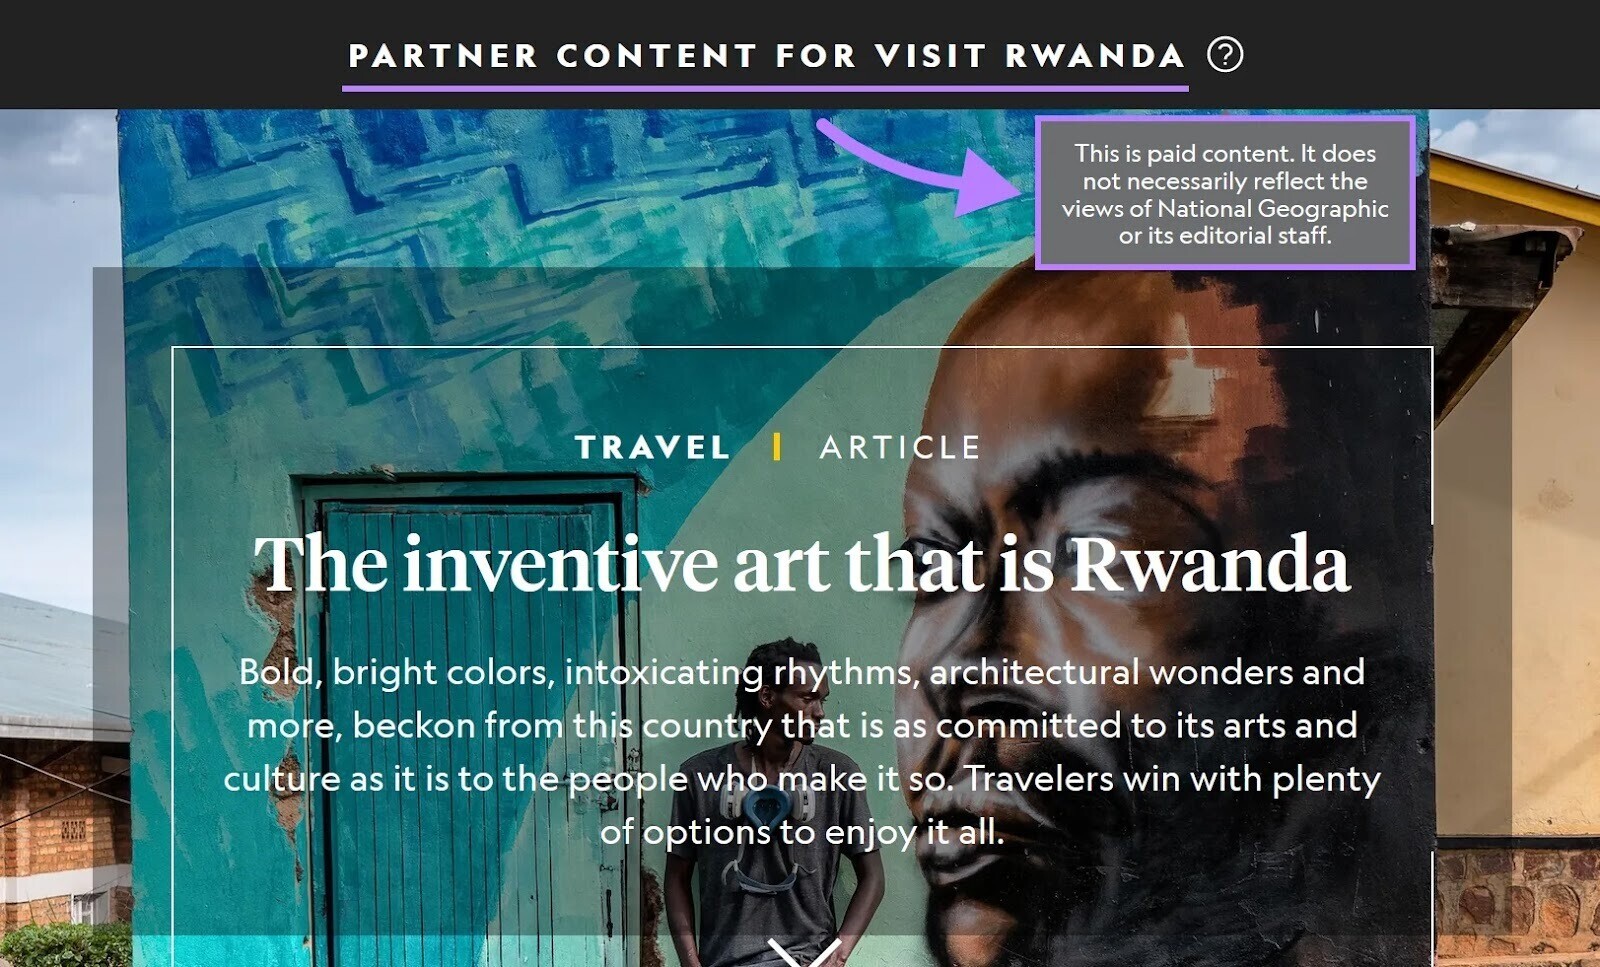 an article from Visit Rwanda, published on National Geographic